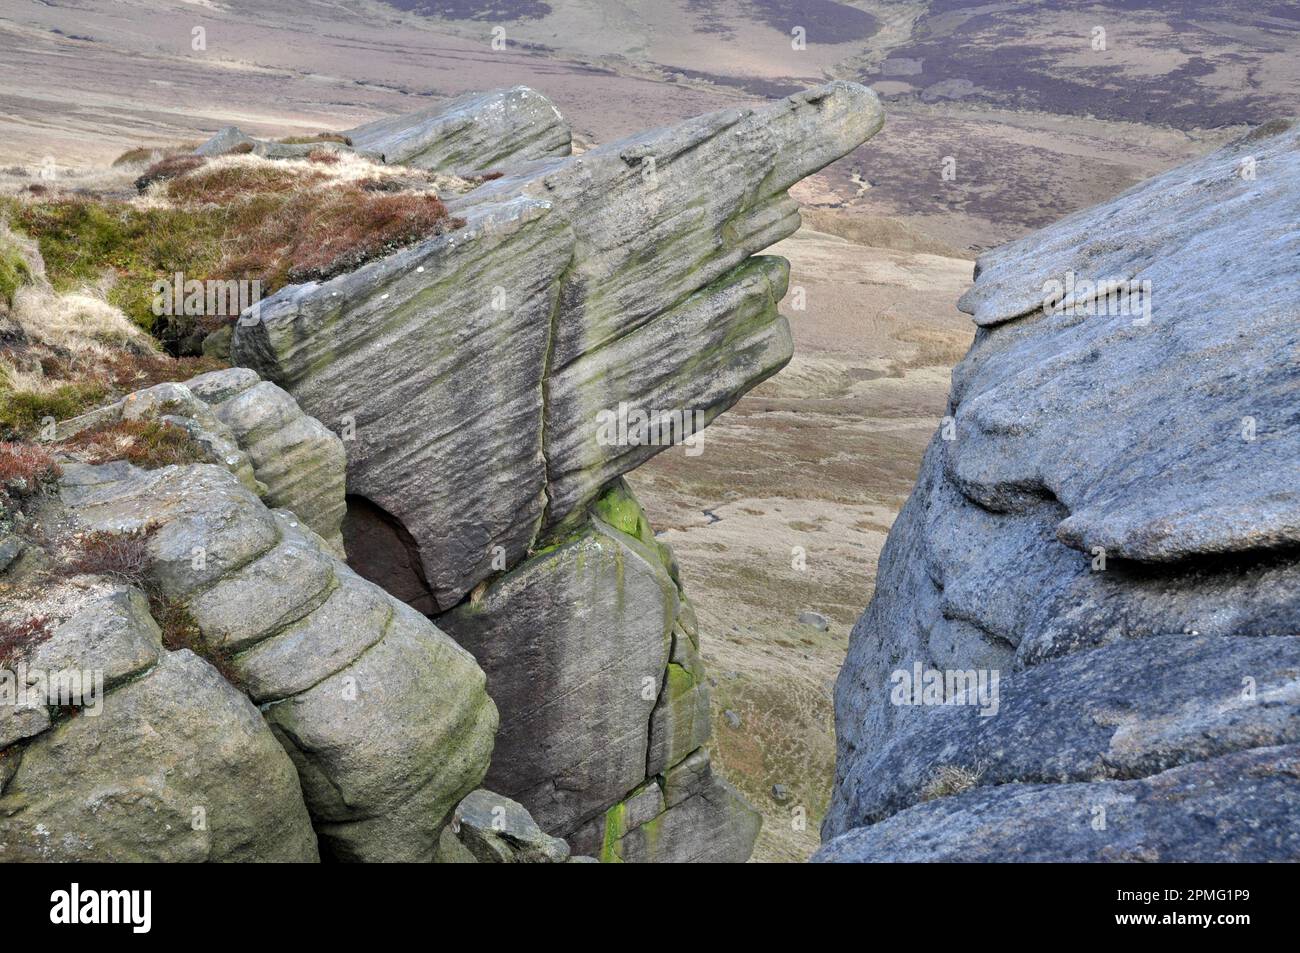 Rock formation looking like a signpost, on the North edge of Kinder Scout, Peak District, Derbyshire, England Stock Photo